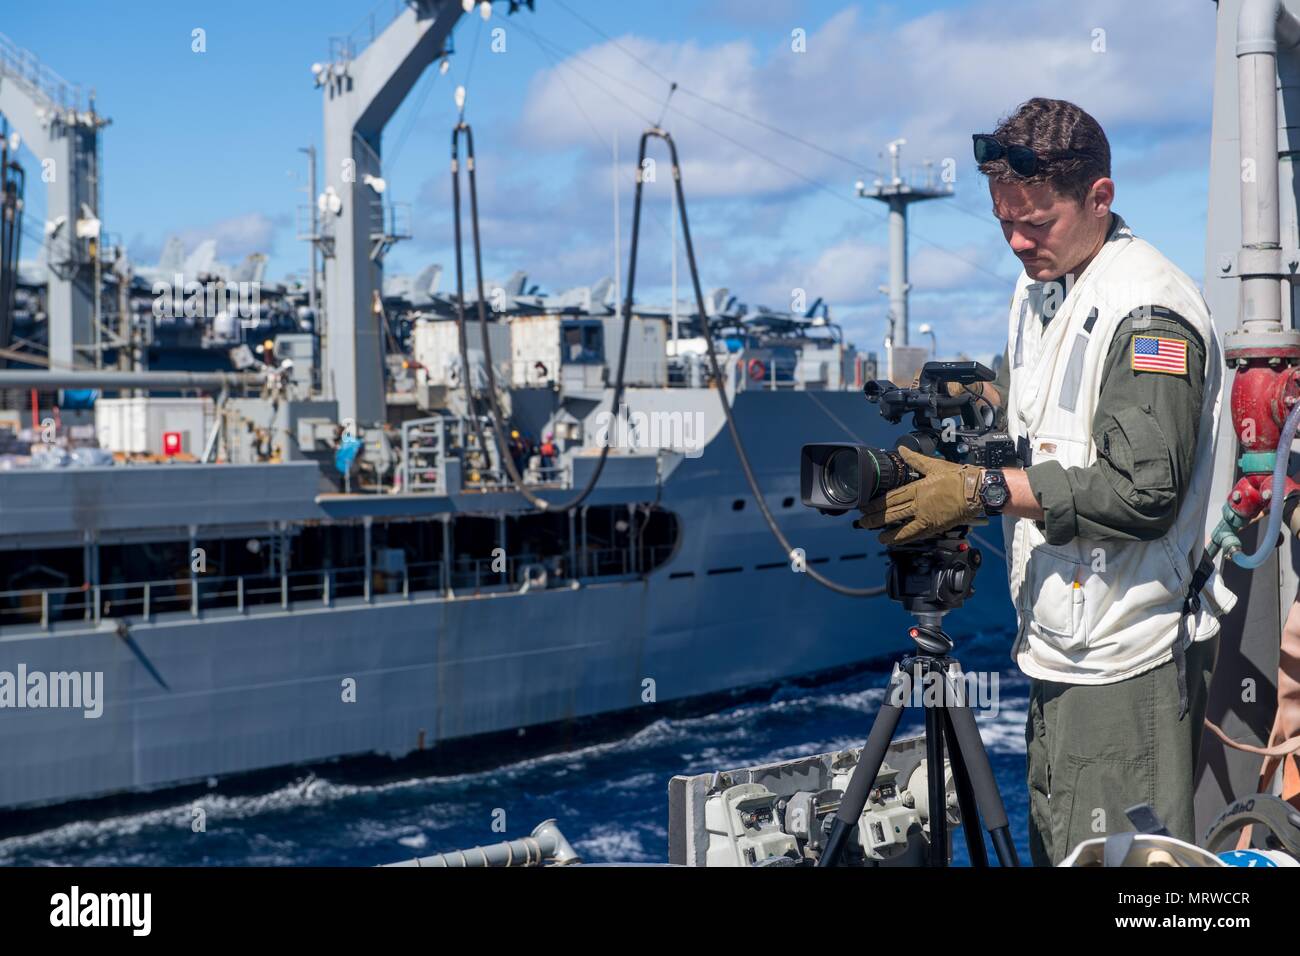 170622-N-VR594-0468 PACIFIC OCEAN (June 22, 2017) Lt. Joseph Cusick, from Yorba Linda, Calif., records footage of the Ticonderoga-class guided-missile cruiser USS Princeton (CG 59) conducting a replenishment-at-sea with the fleet replenishment oiler USNS Yukon (T-AO 202). Princeton is currently deployed in the 7th fleet area of operations. The U.S. Navy has patrolled the Indo-Asia-Pacific routinely for more than 70 years promoting regional peace and security. (U.S. Navy photo by Mass Communication Specialist 3rd Class Kelsey J. Hockenberger/Released) Stock Photo